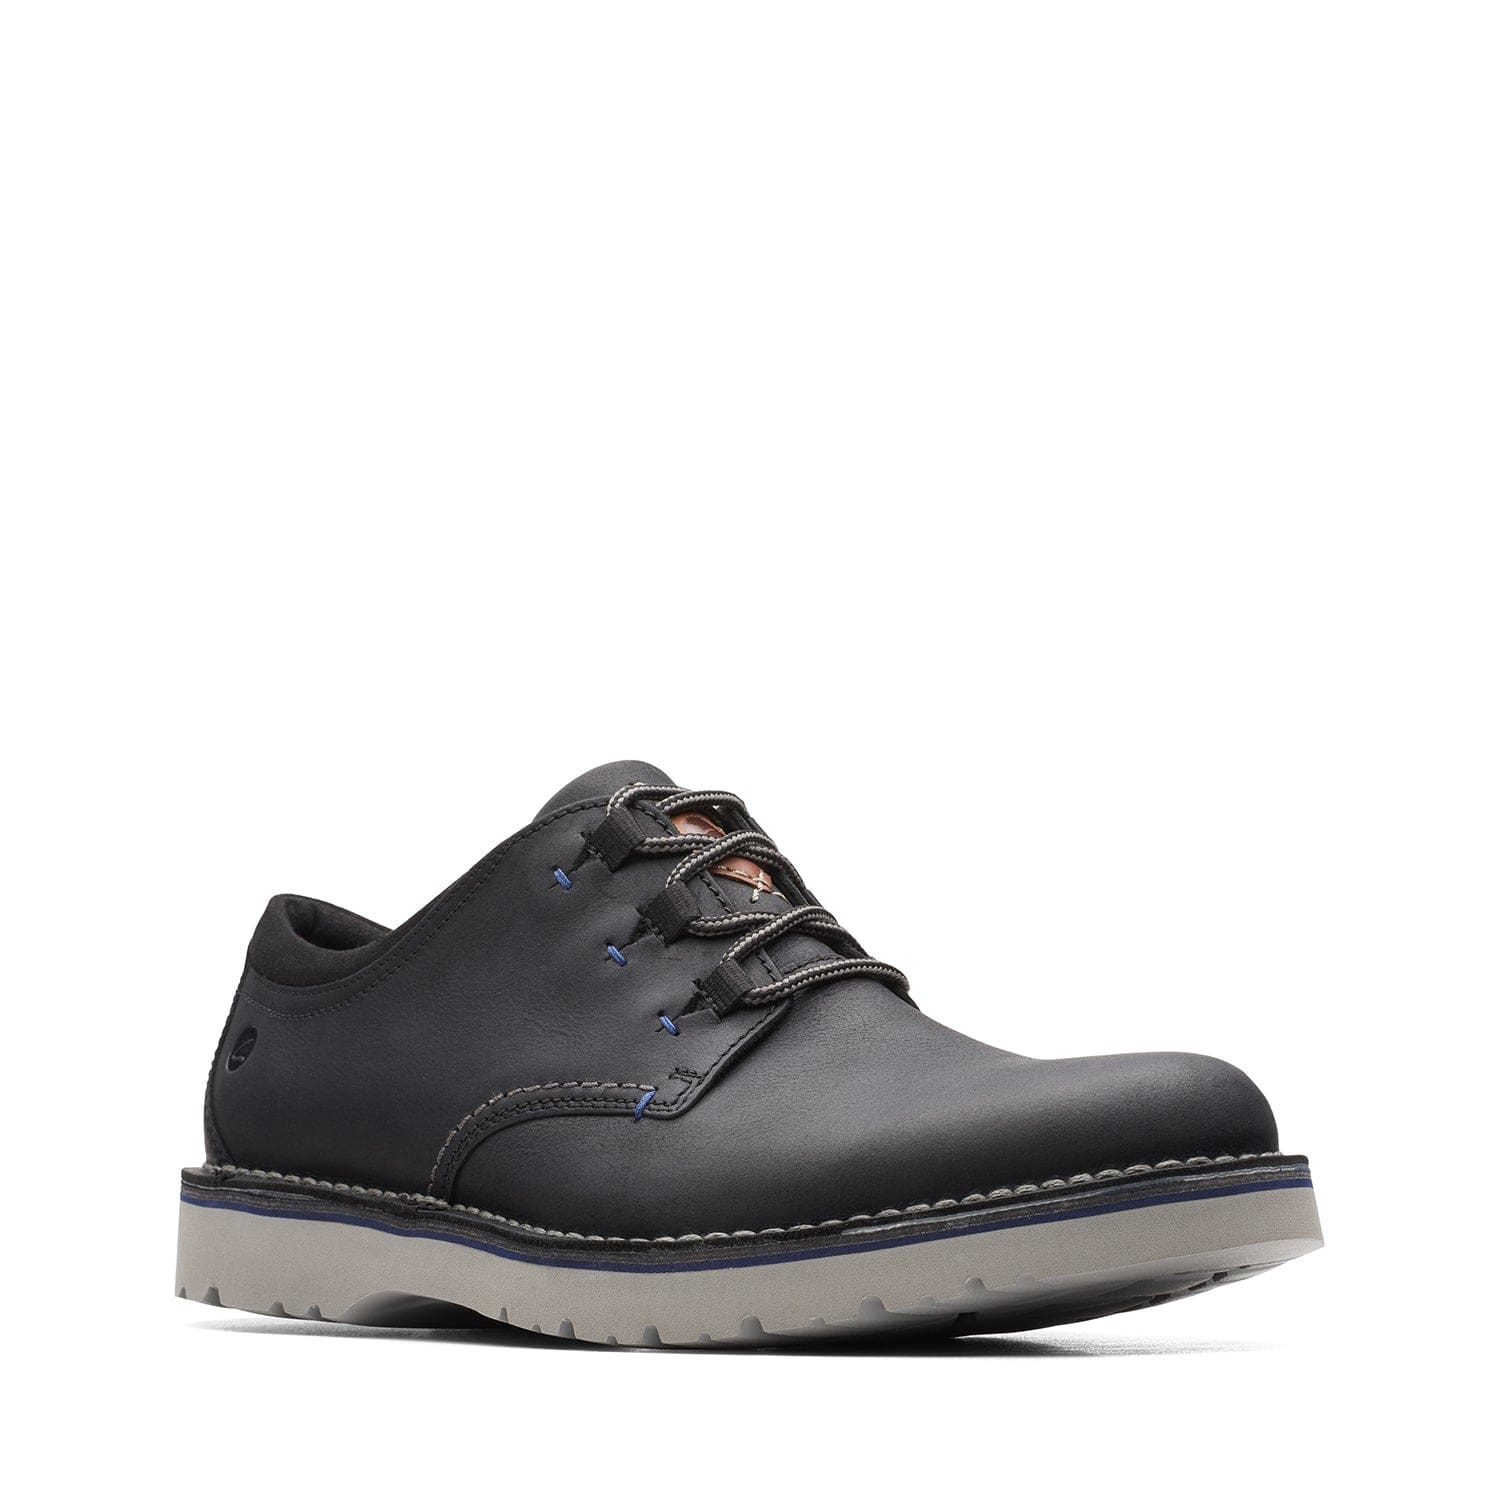 Clarks Eastford Low Shoes - Black Leather - 261629197 - G Width (Standard Fit)